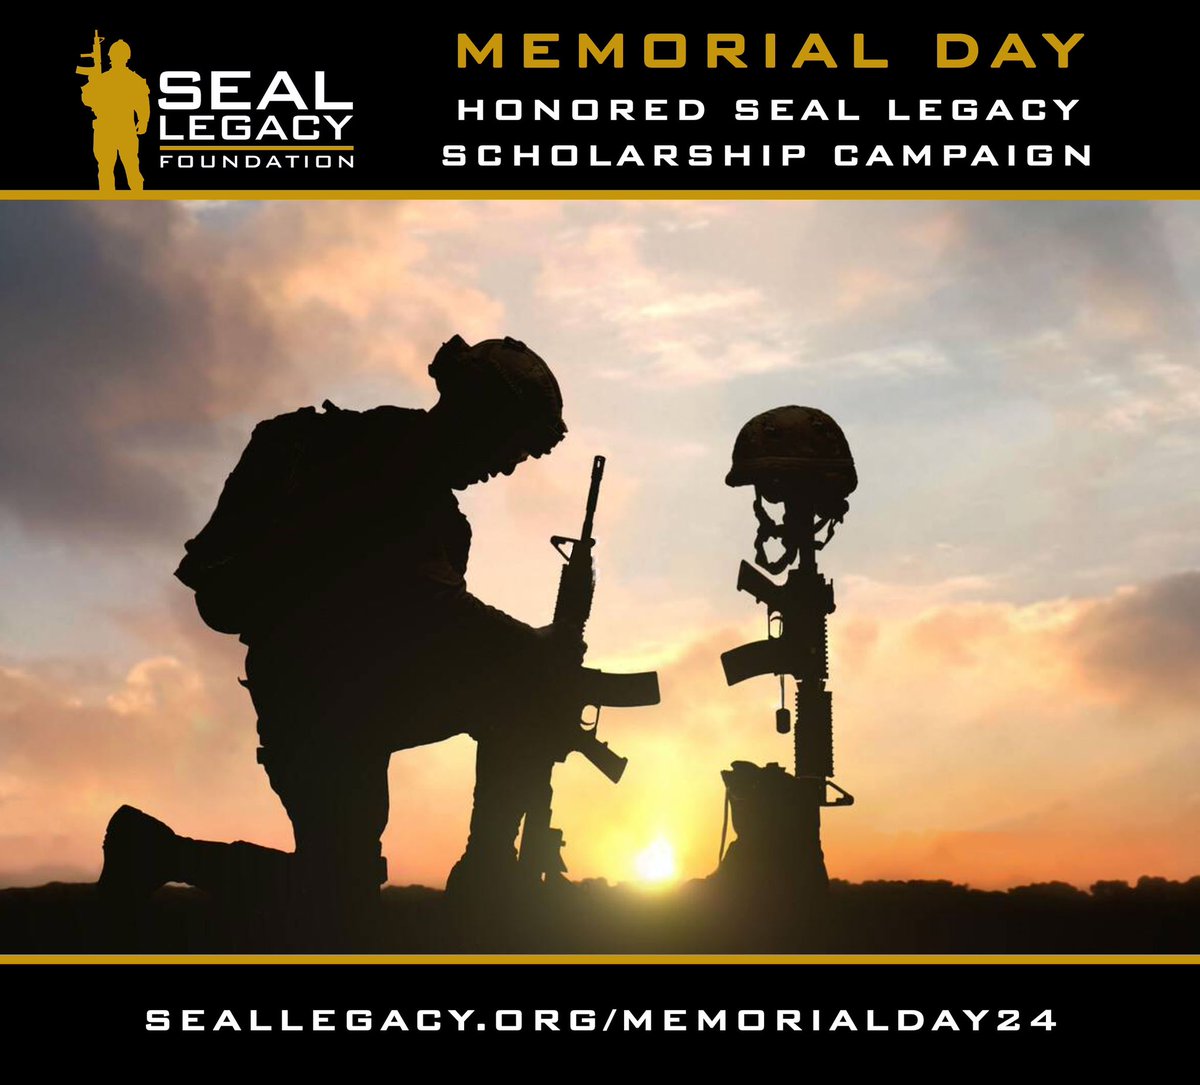 CALLING ALL PATRIOTS! Still time to support the Honored SEAL Legacy Scholarship Campaign! DONATE: SEALLegacy.org/memorialday24 AUCTION - closes at Midnight EST: SEALLegacy.org/auction24